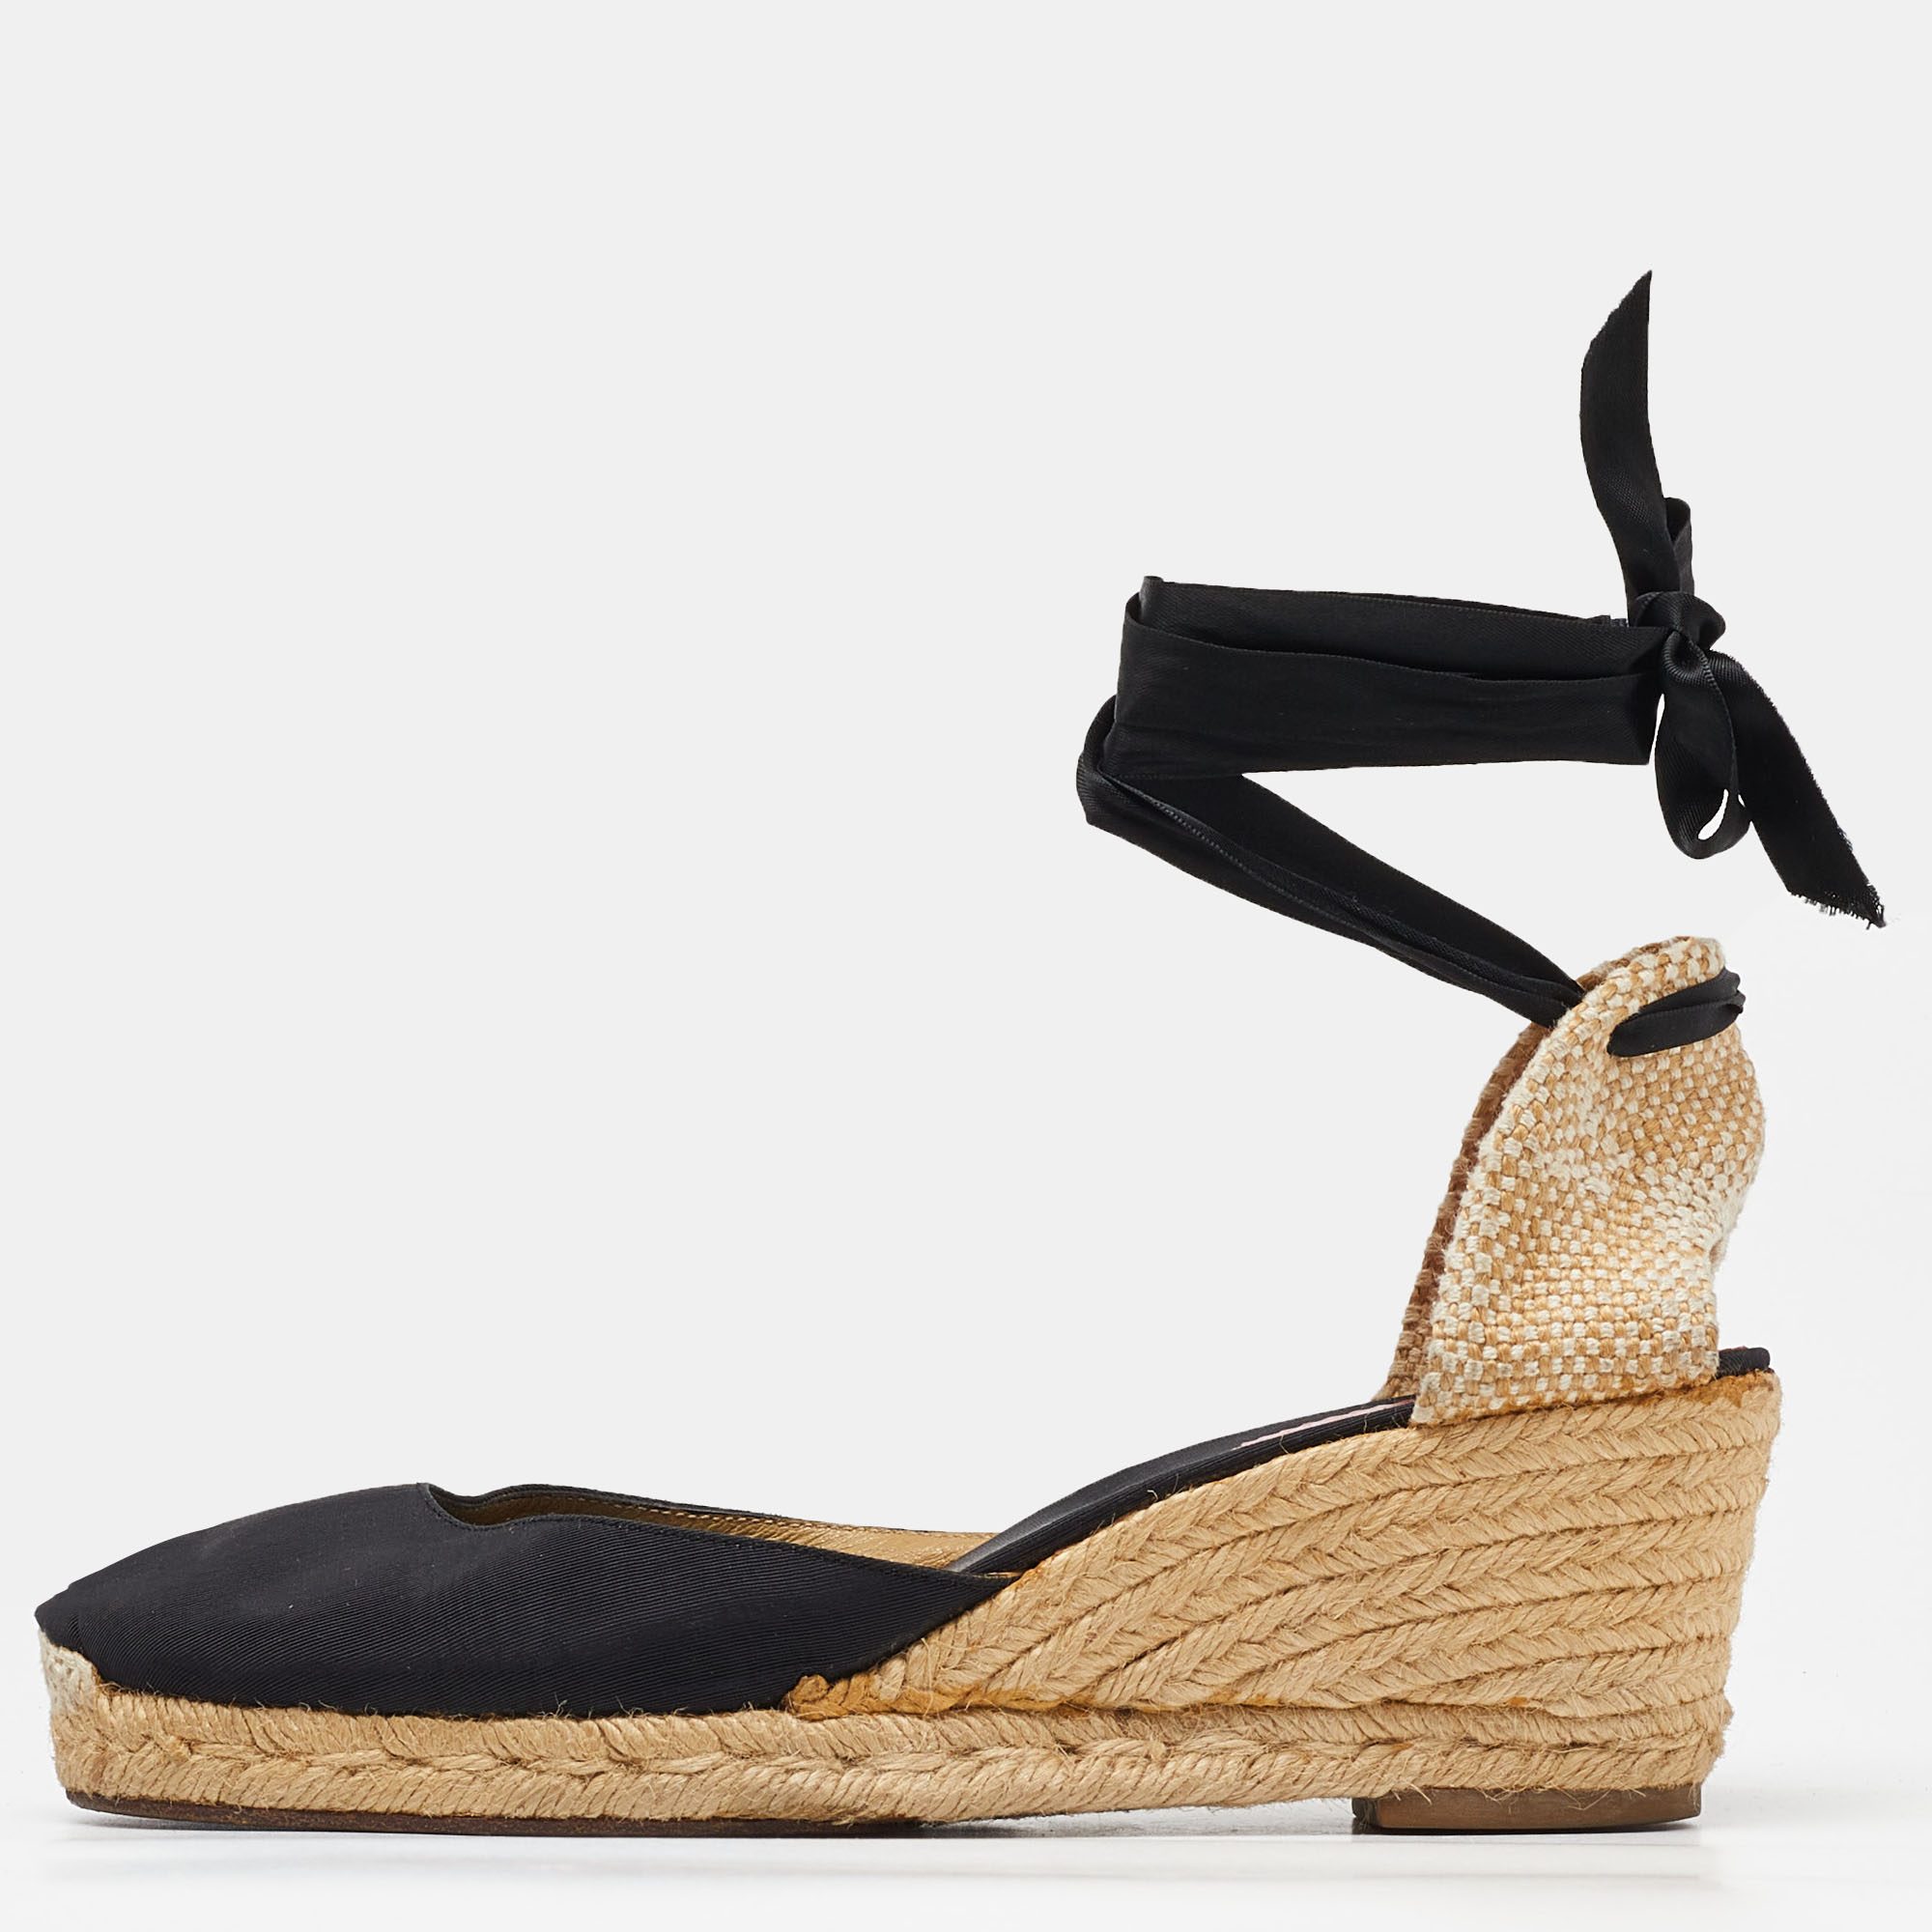 Christian louboutin black/beige canvas and woven jute carino plato wedge espadrille sandals size 41